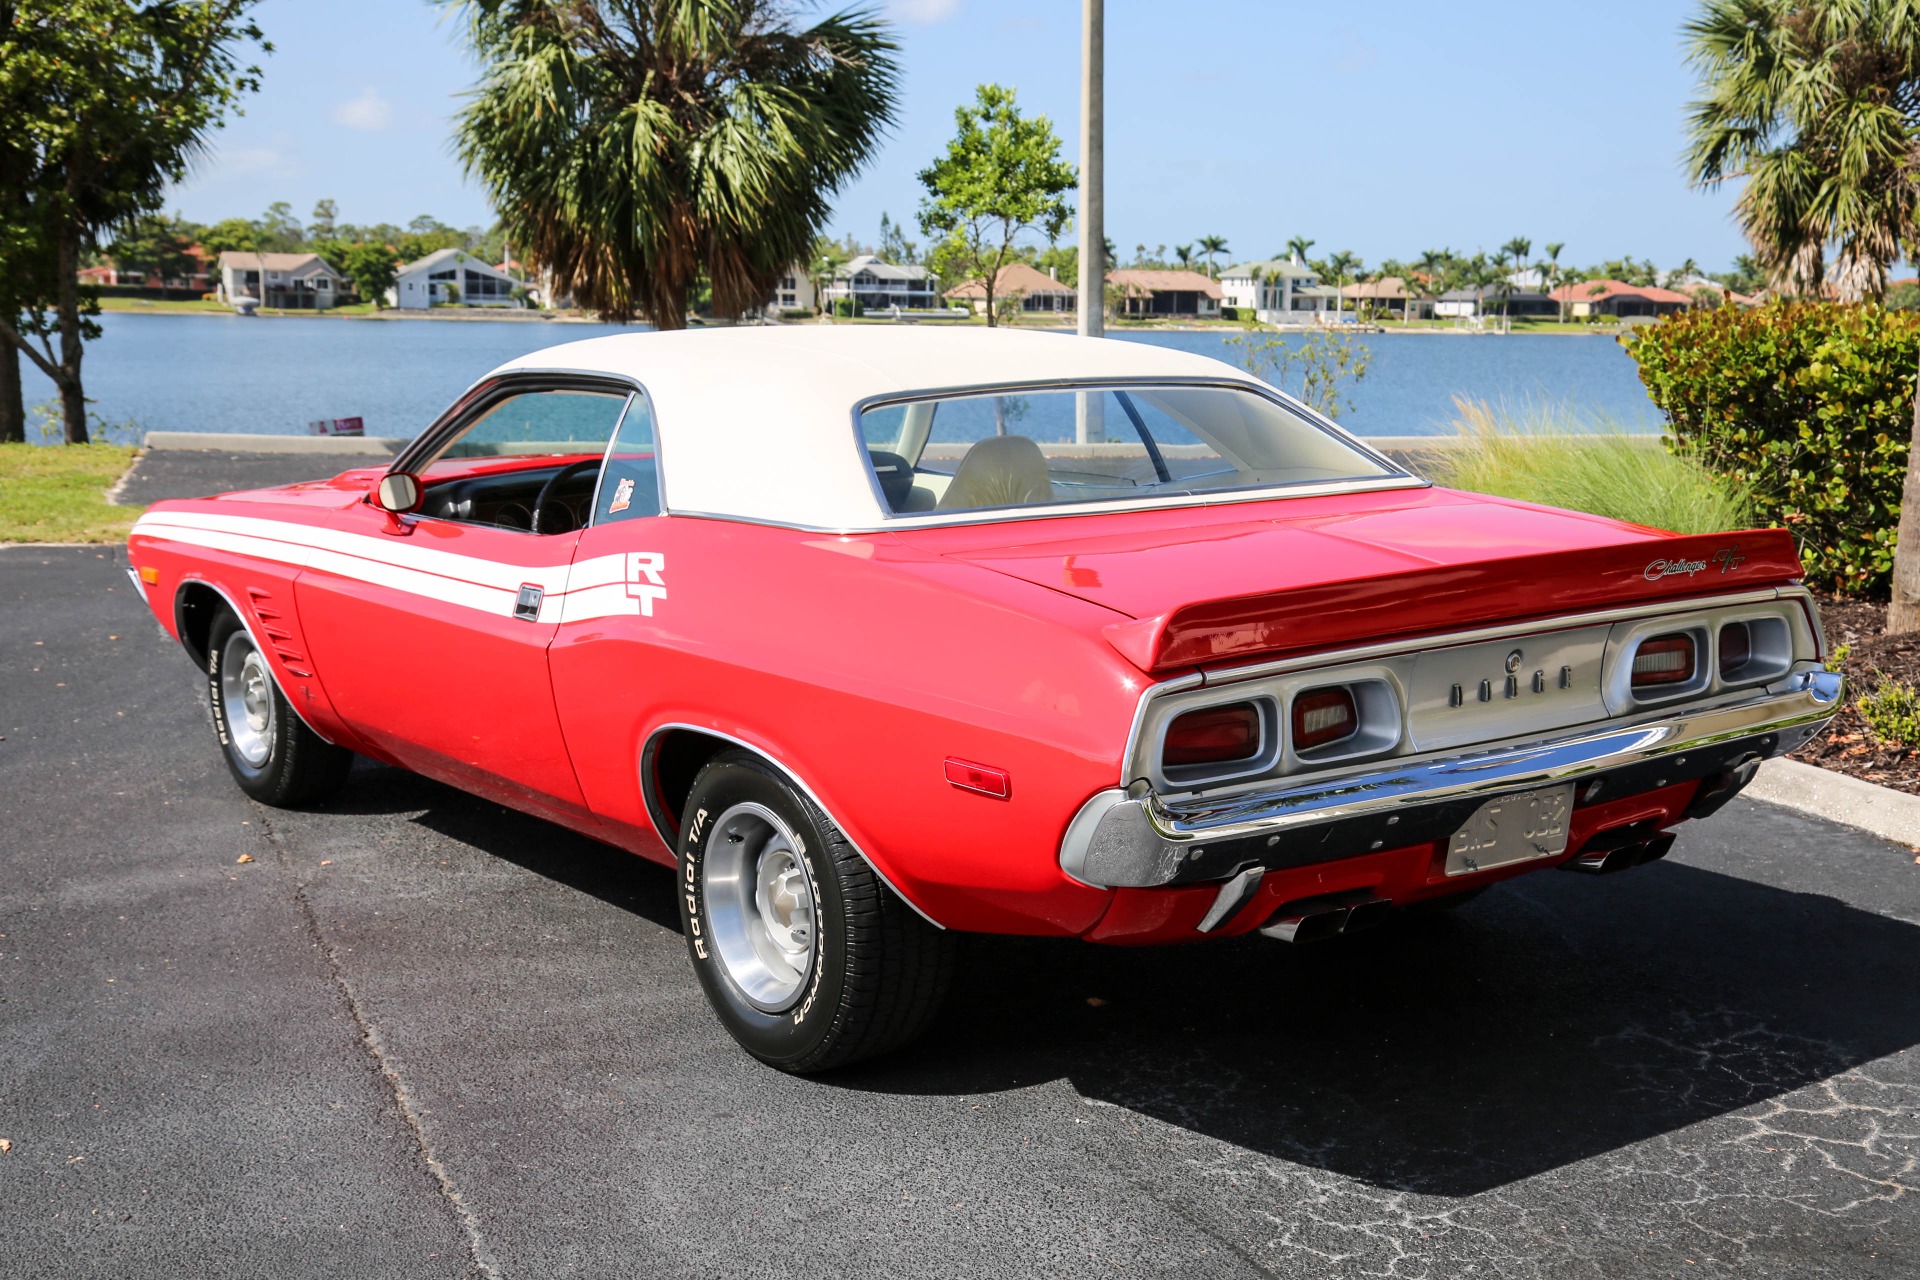 Used 1973 Dodge Challenger Ralley 340 Car for sale $44,900 at Muscle Cars for Sale Inc. in Fort Myers FL 33912 7